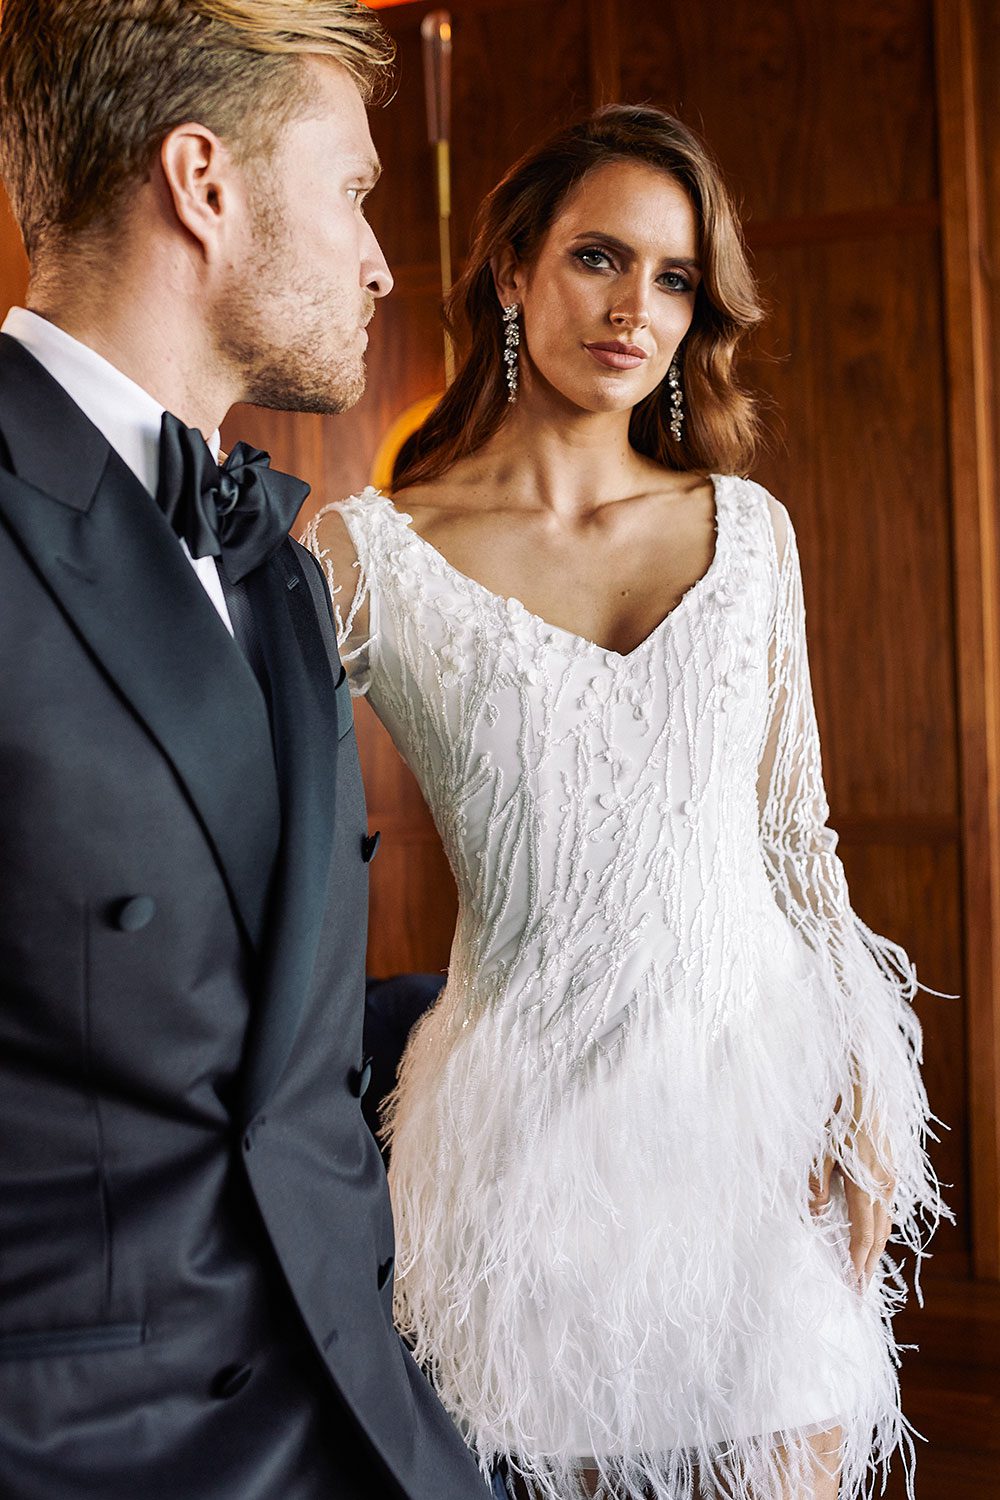 Nikora Wedding gown from Vinka Design - This sexy gown is sure to turn heads! Adorned with feathers that accentuate movement and bell sleeves that add flare, a high neckline, and low back. Close up of bride standing next to groom in a hotel